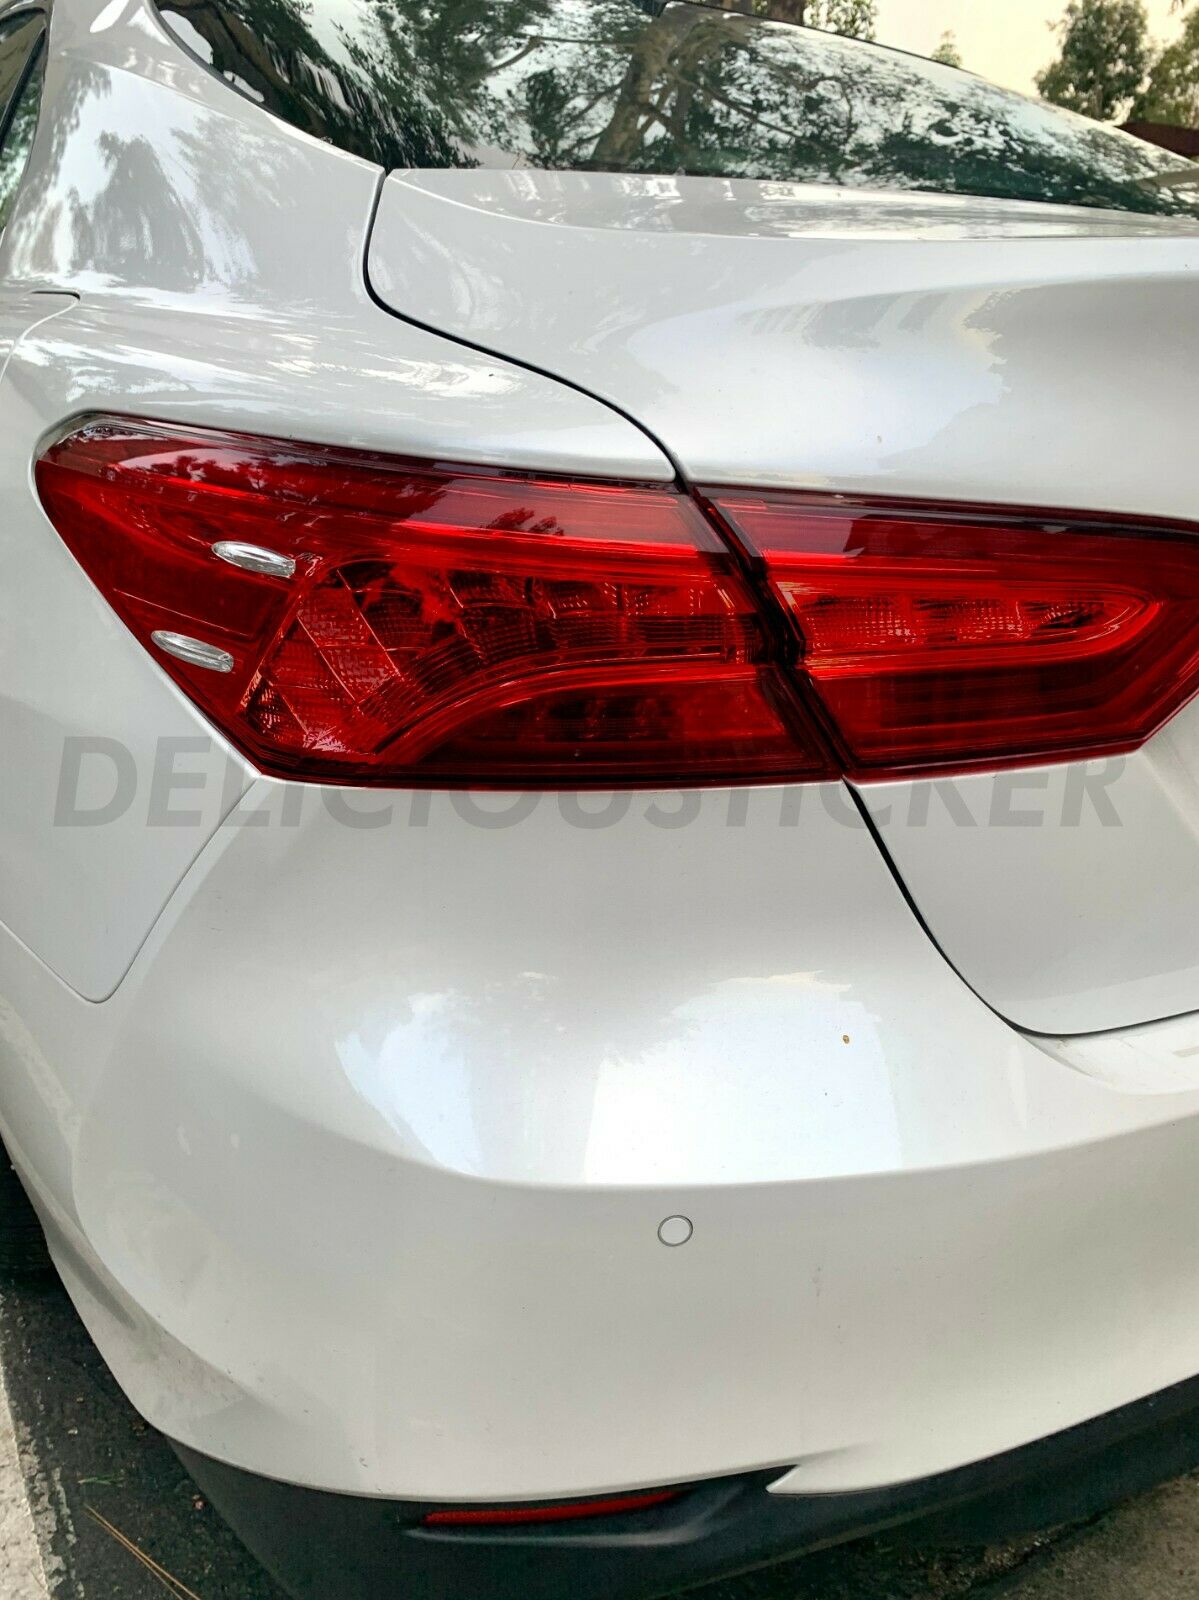 RED Tail Light Insert Overlays (Fits For: 2018 + Camry)